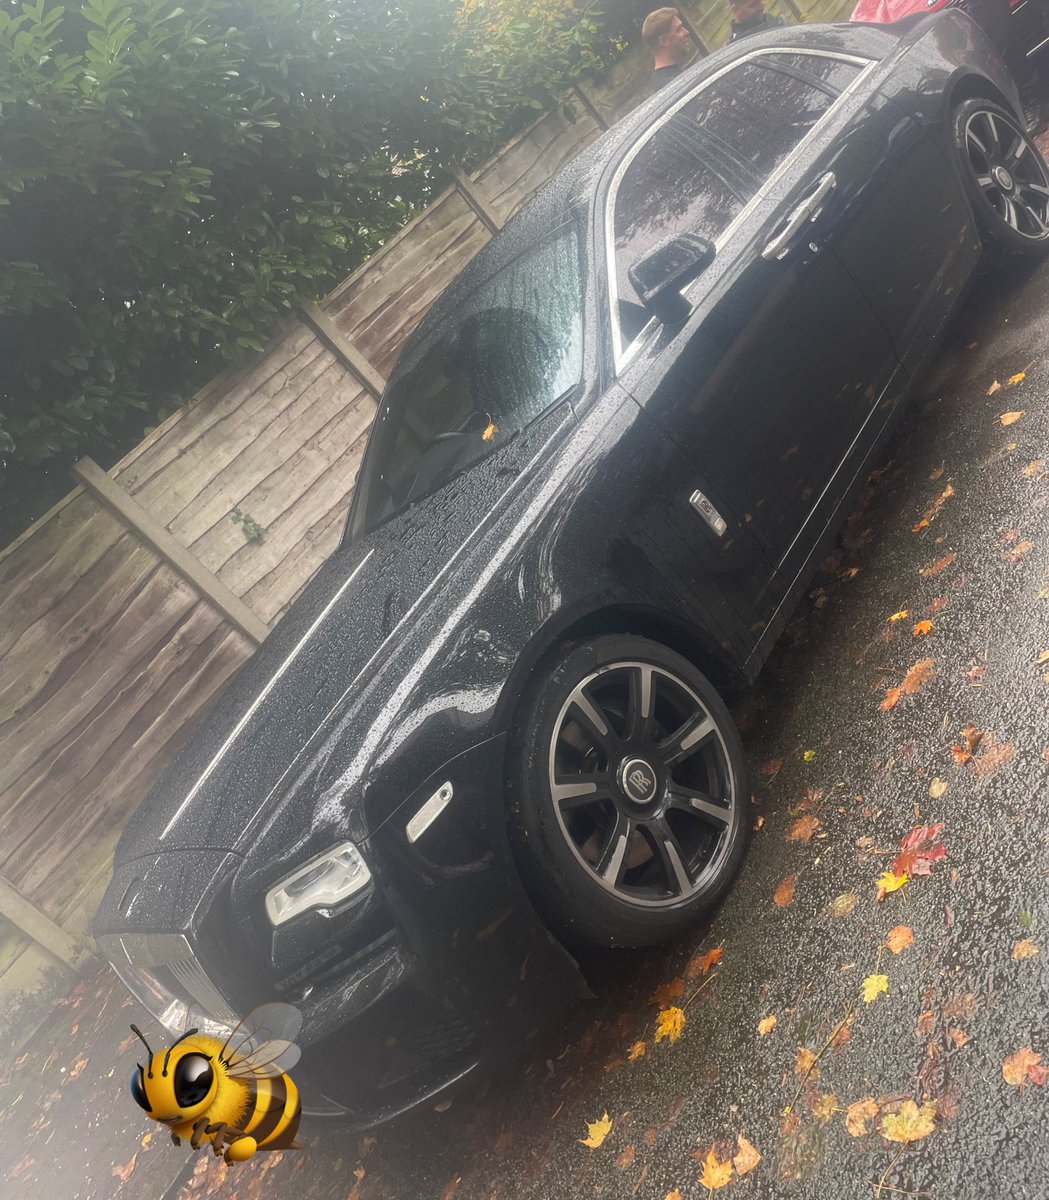 #SMV #Stolen🌓#Burglary @gmpolice #RollsRoyceGhost #Located🕵️‍♂️15min of victim☎️#247365SecureOperatingCentre @globaltele🥇🛰️#Recovered #TVIU🚔@gmptraffic #DisruptingCriminality #TogetherWeCan #ItPaysToInvestInSecurity #AssetRecovery 🇬🇧UK’s No1 Telemetrics🛰️& Recovery🐾🎣🐝@IAATIUK